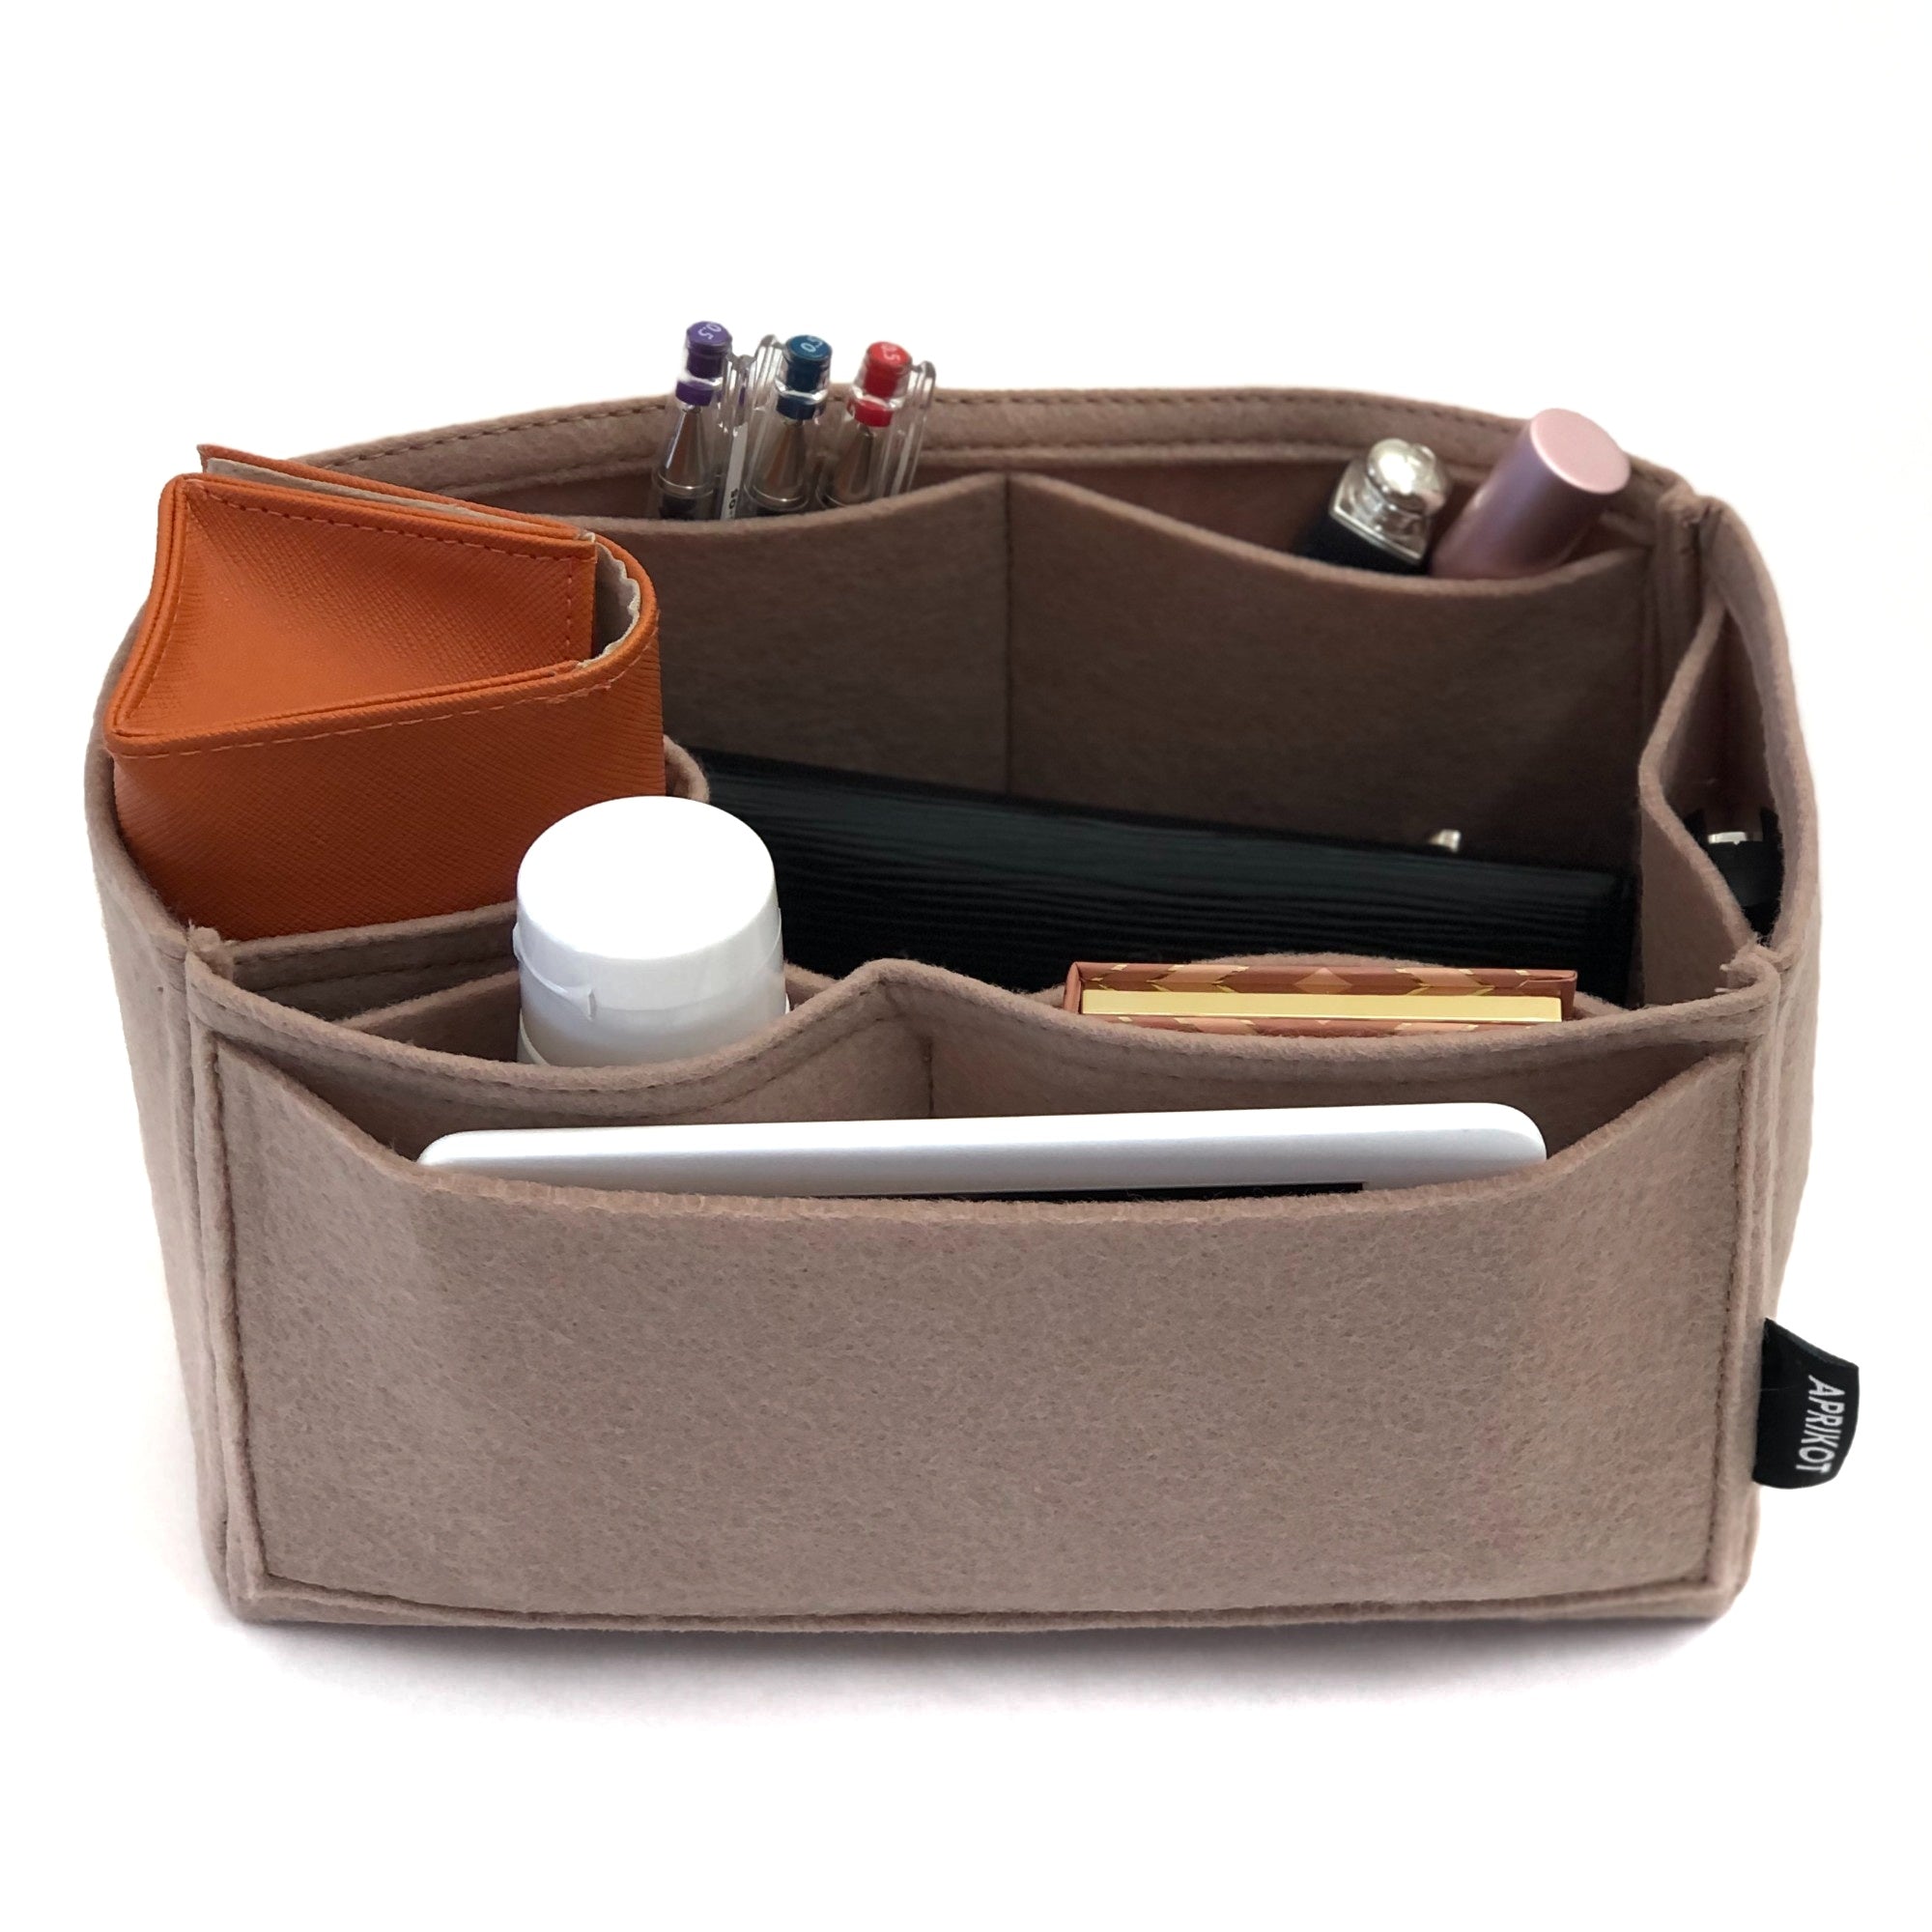 Louis Vuitton Delightful Organizer Insert, Bag Organizer with Single Bottle  and Pen Holders